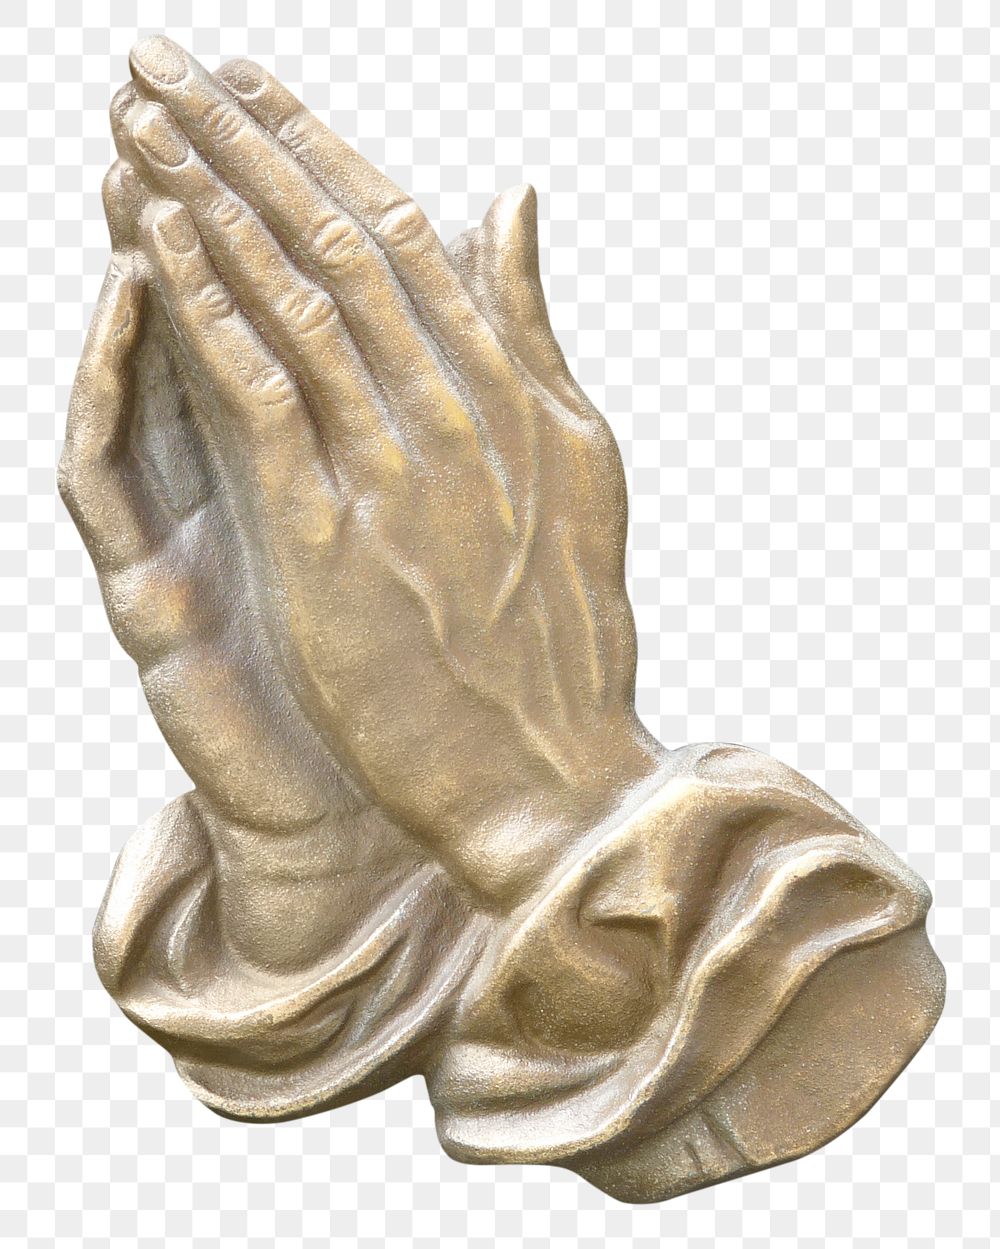 Praying hands png sticker, religious sculpture image, transparent background